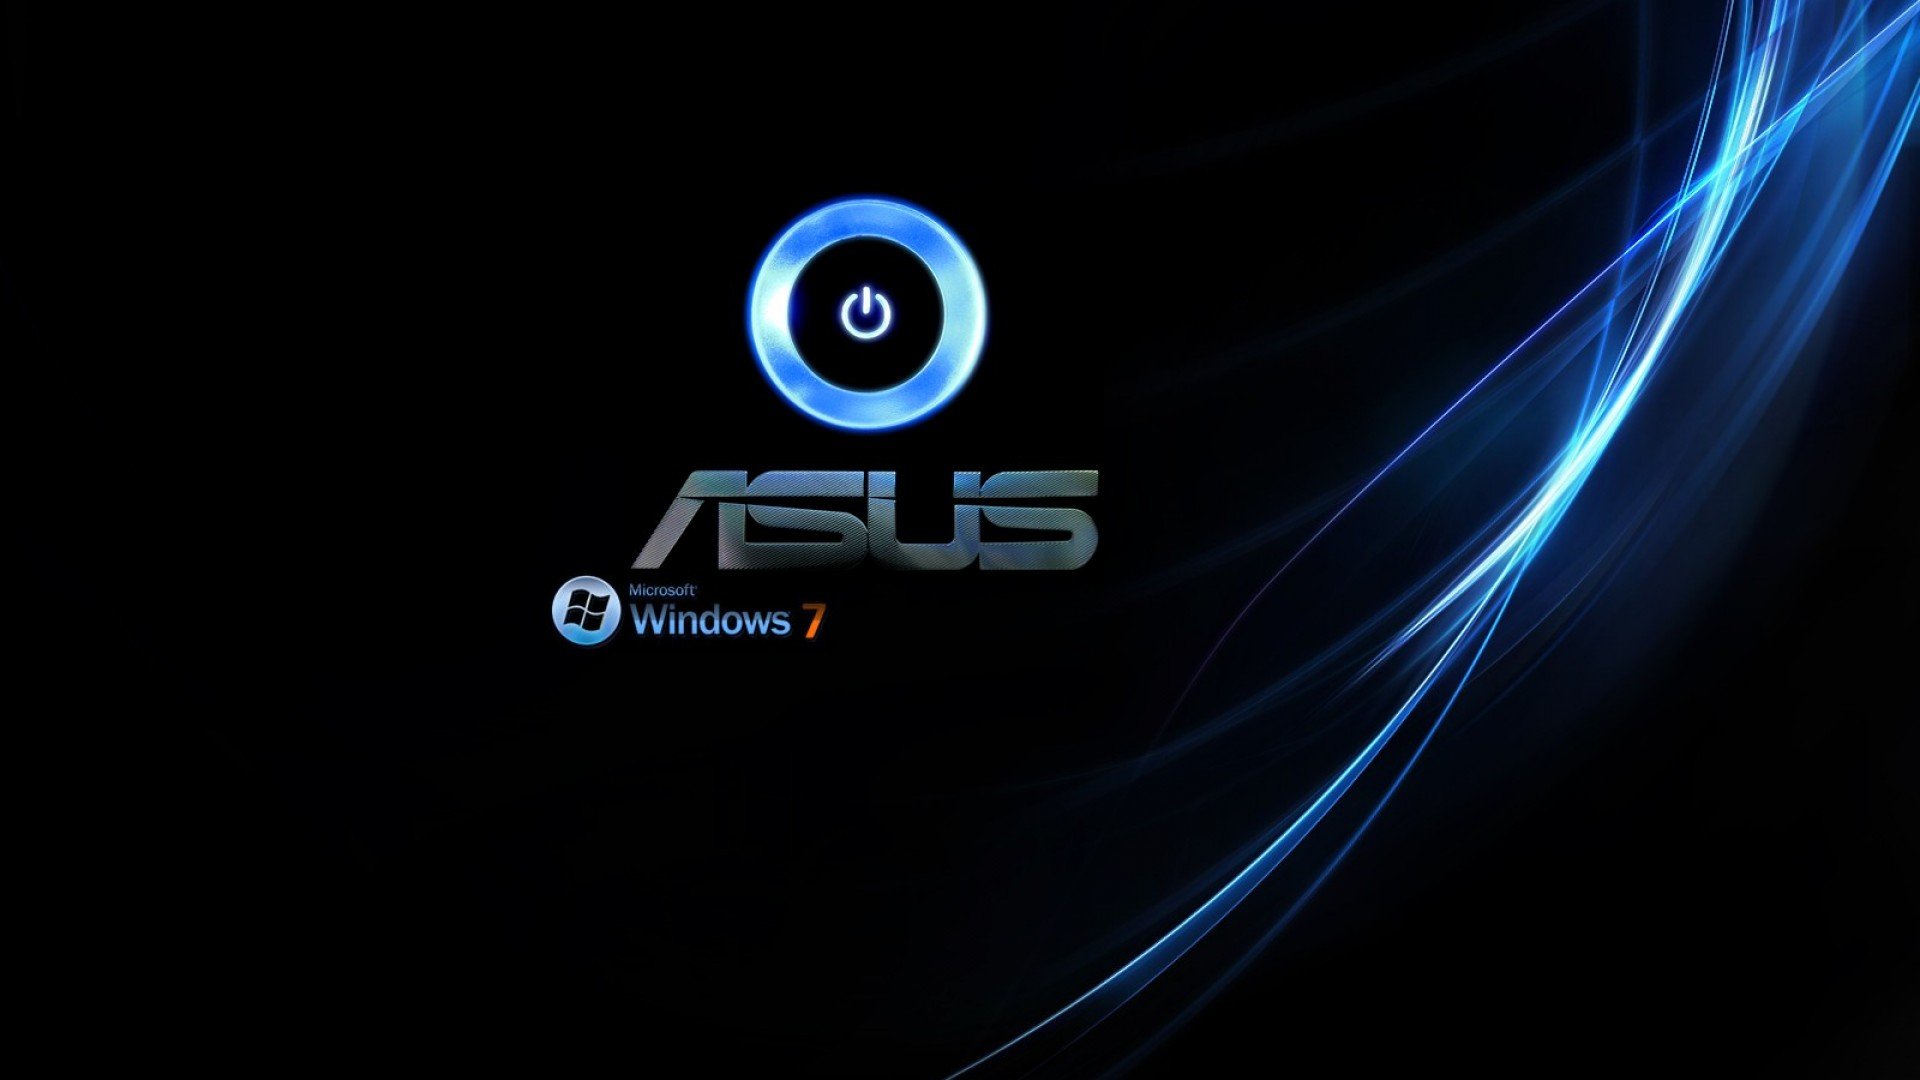 Asus HD Wallpaper Pictures Image